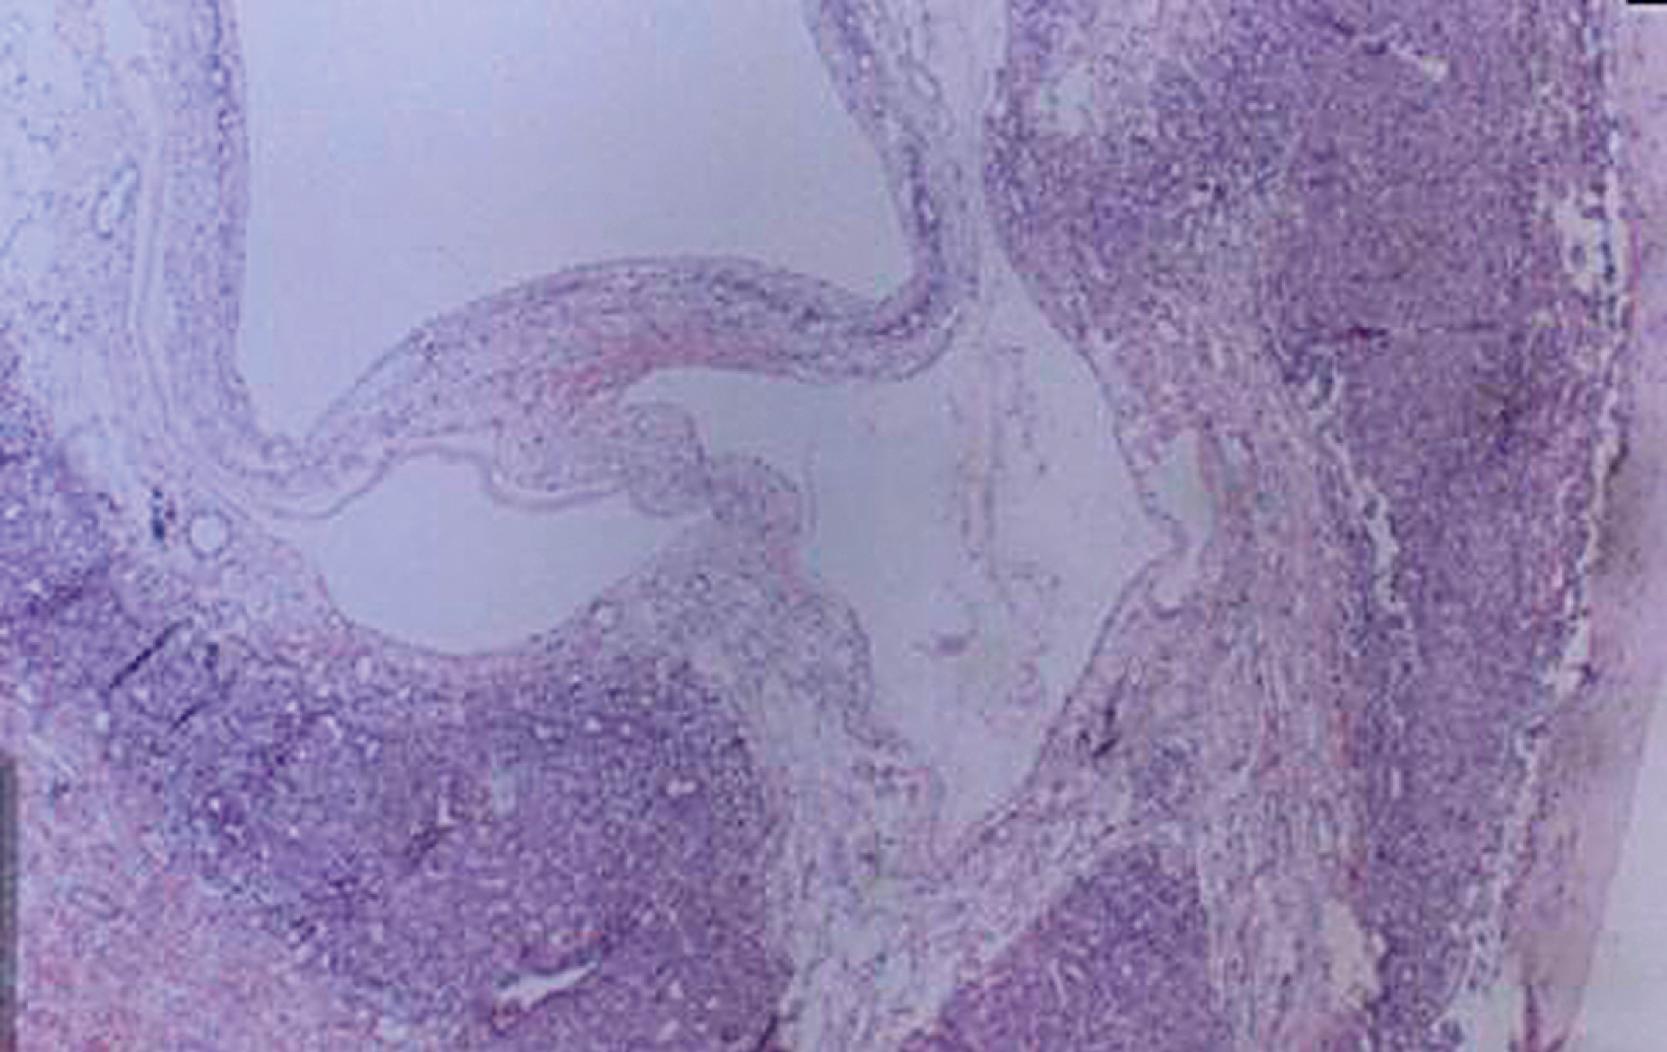 Fig. 66.6, Light microscopy of a mesenchymal hamartoma showing a cyst lined with cuboidal epithelium.